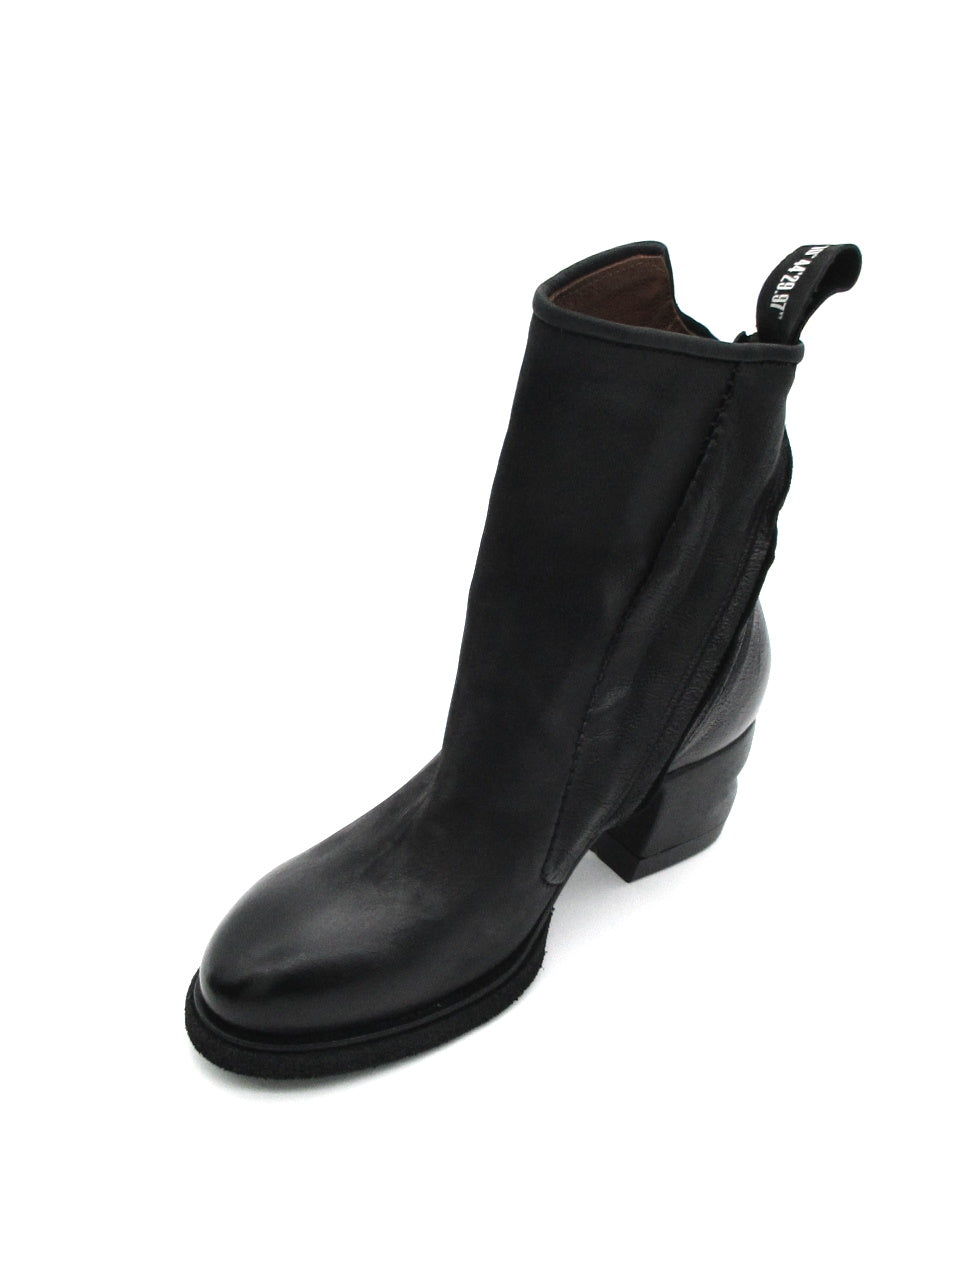 As98 B01202 Black women's leather ankle boot